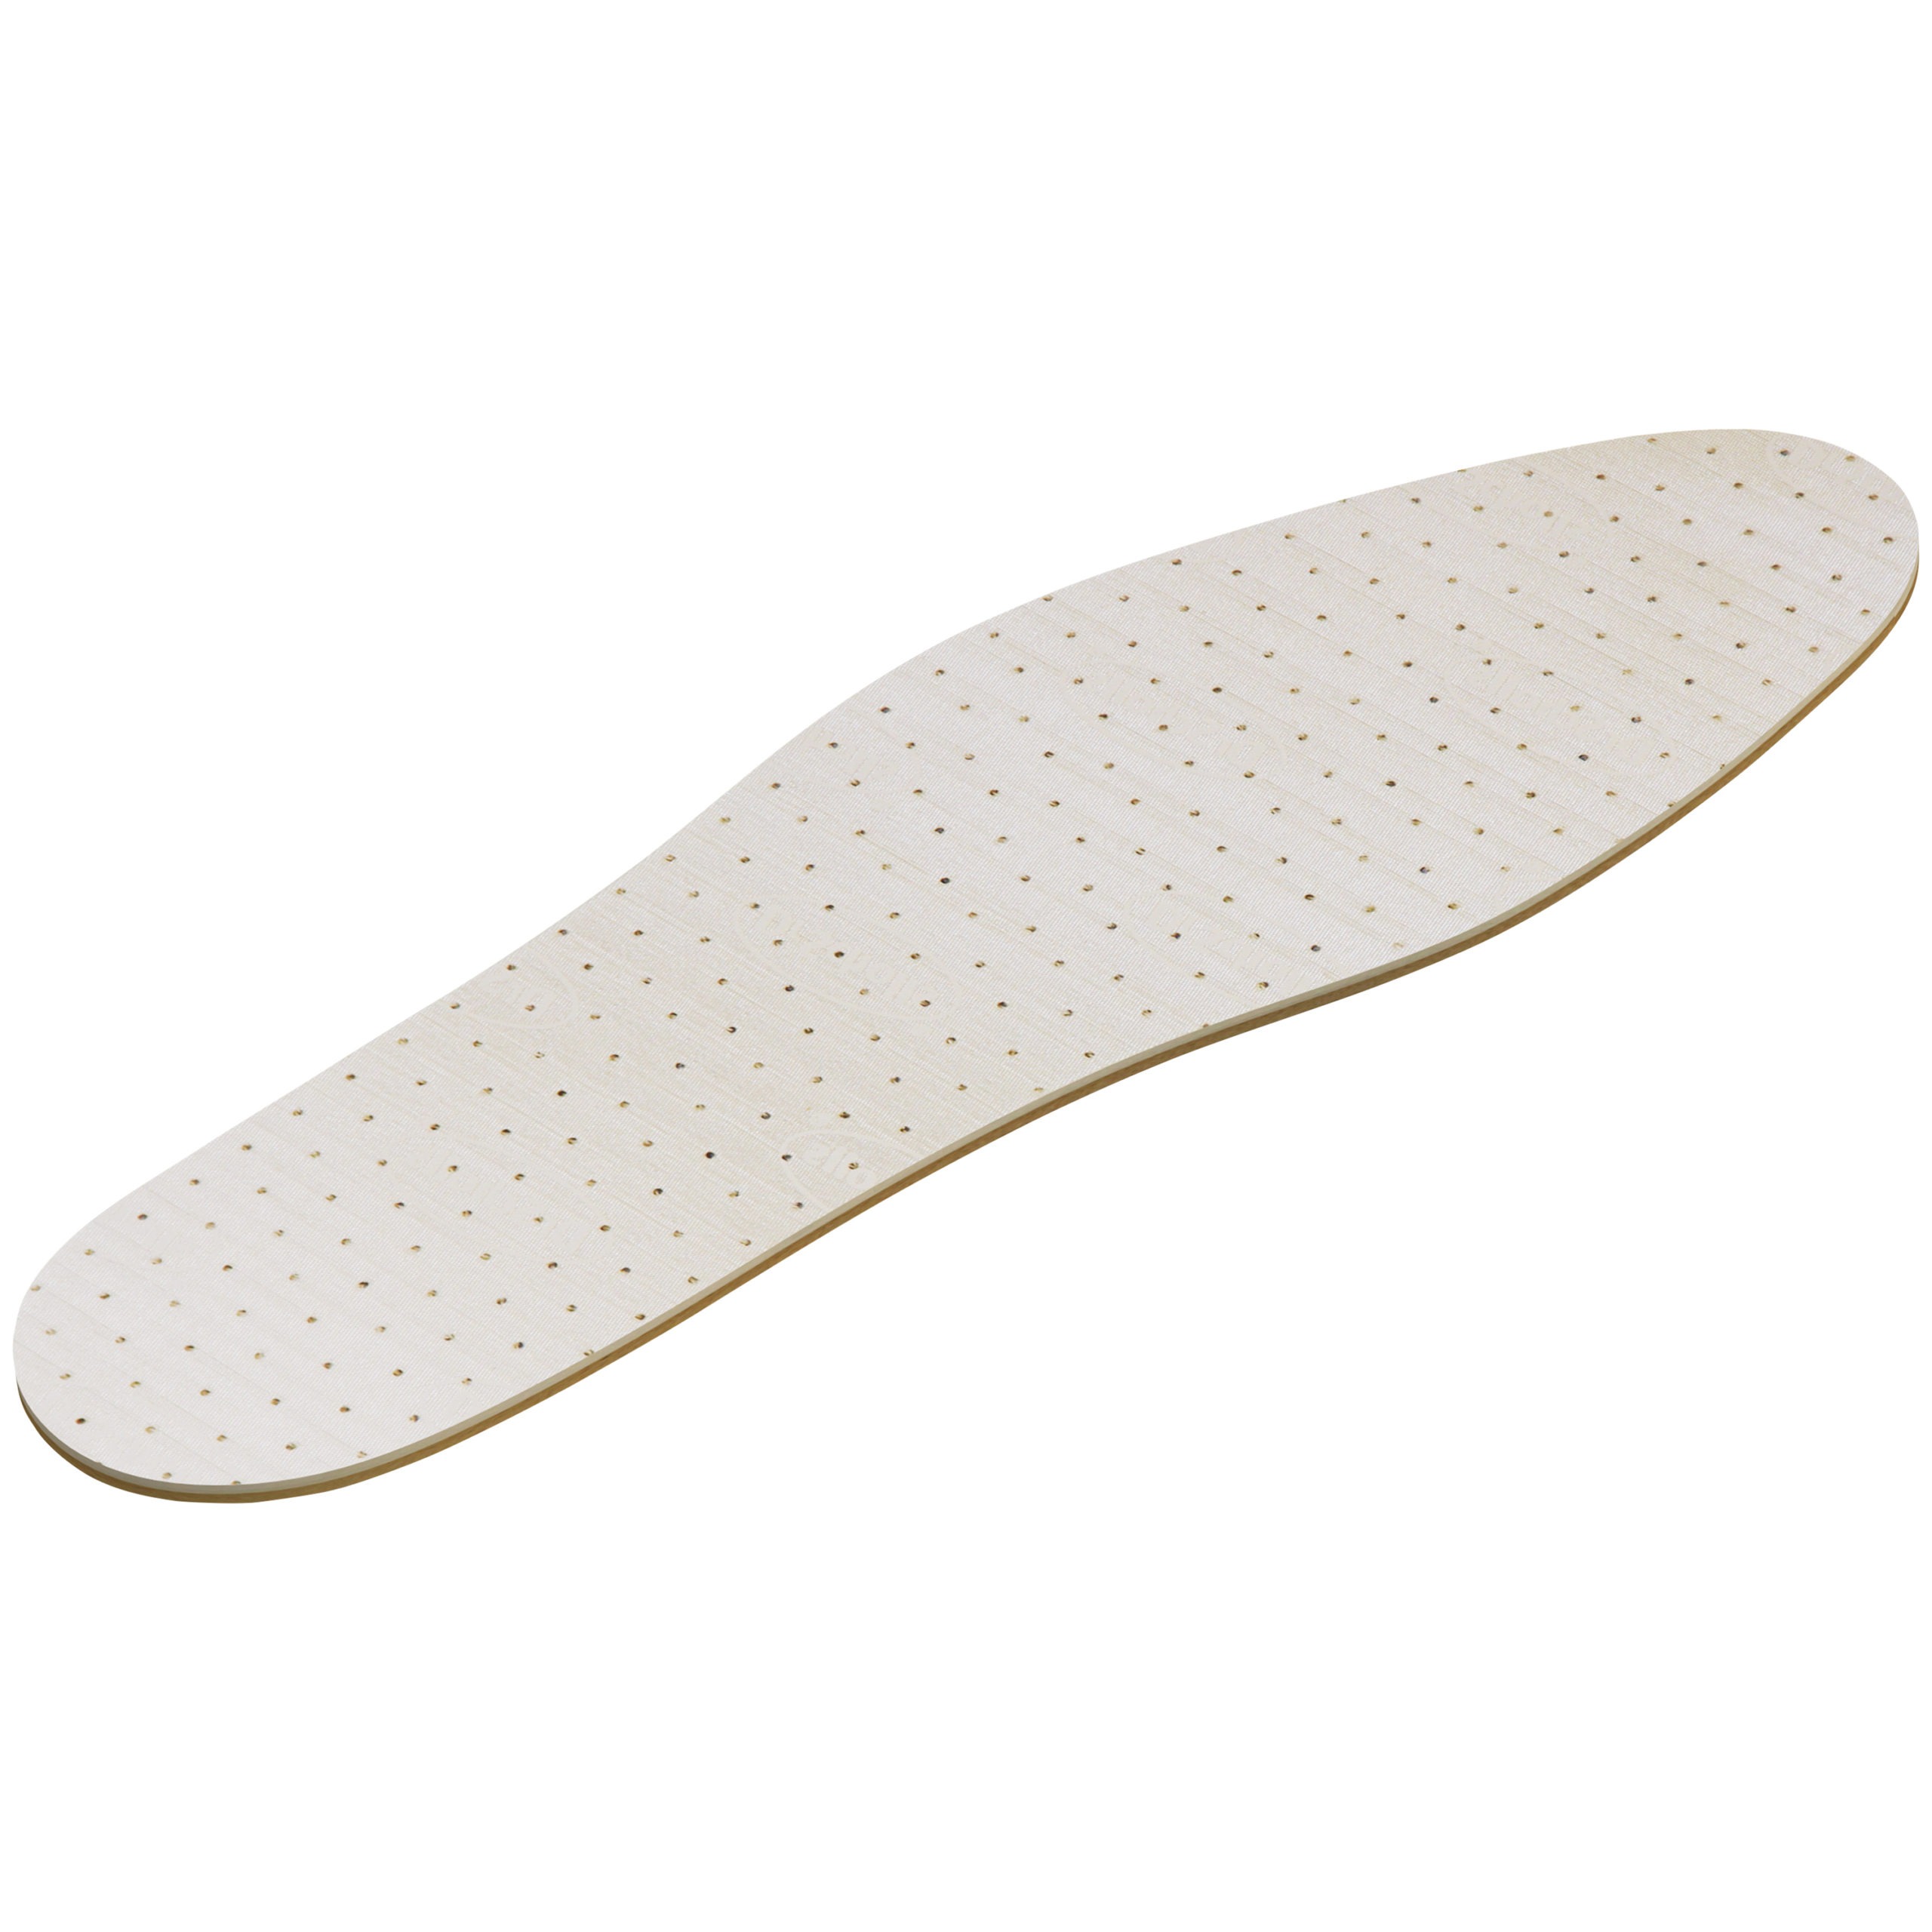 Image of Dr. Scholl's Air Pillo Insoles.